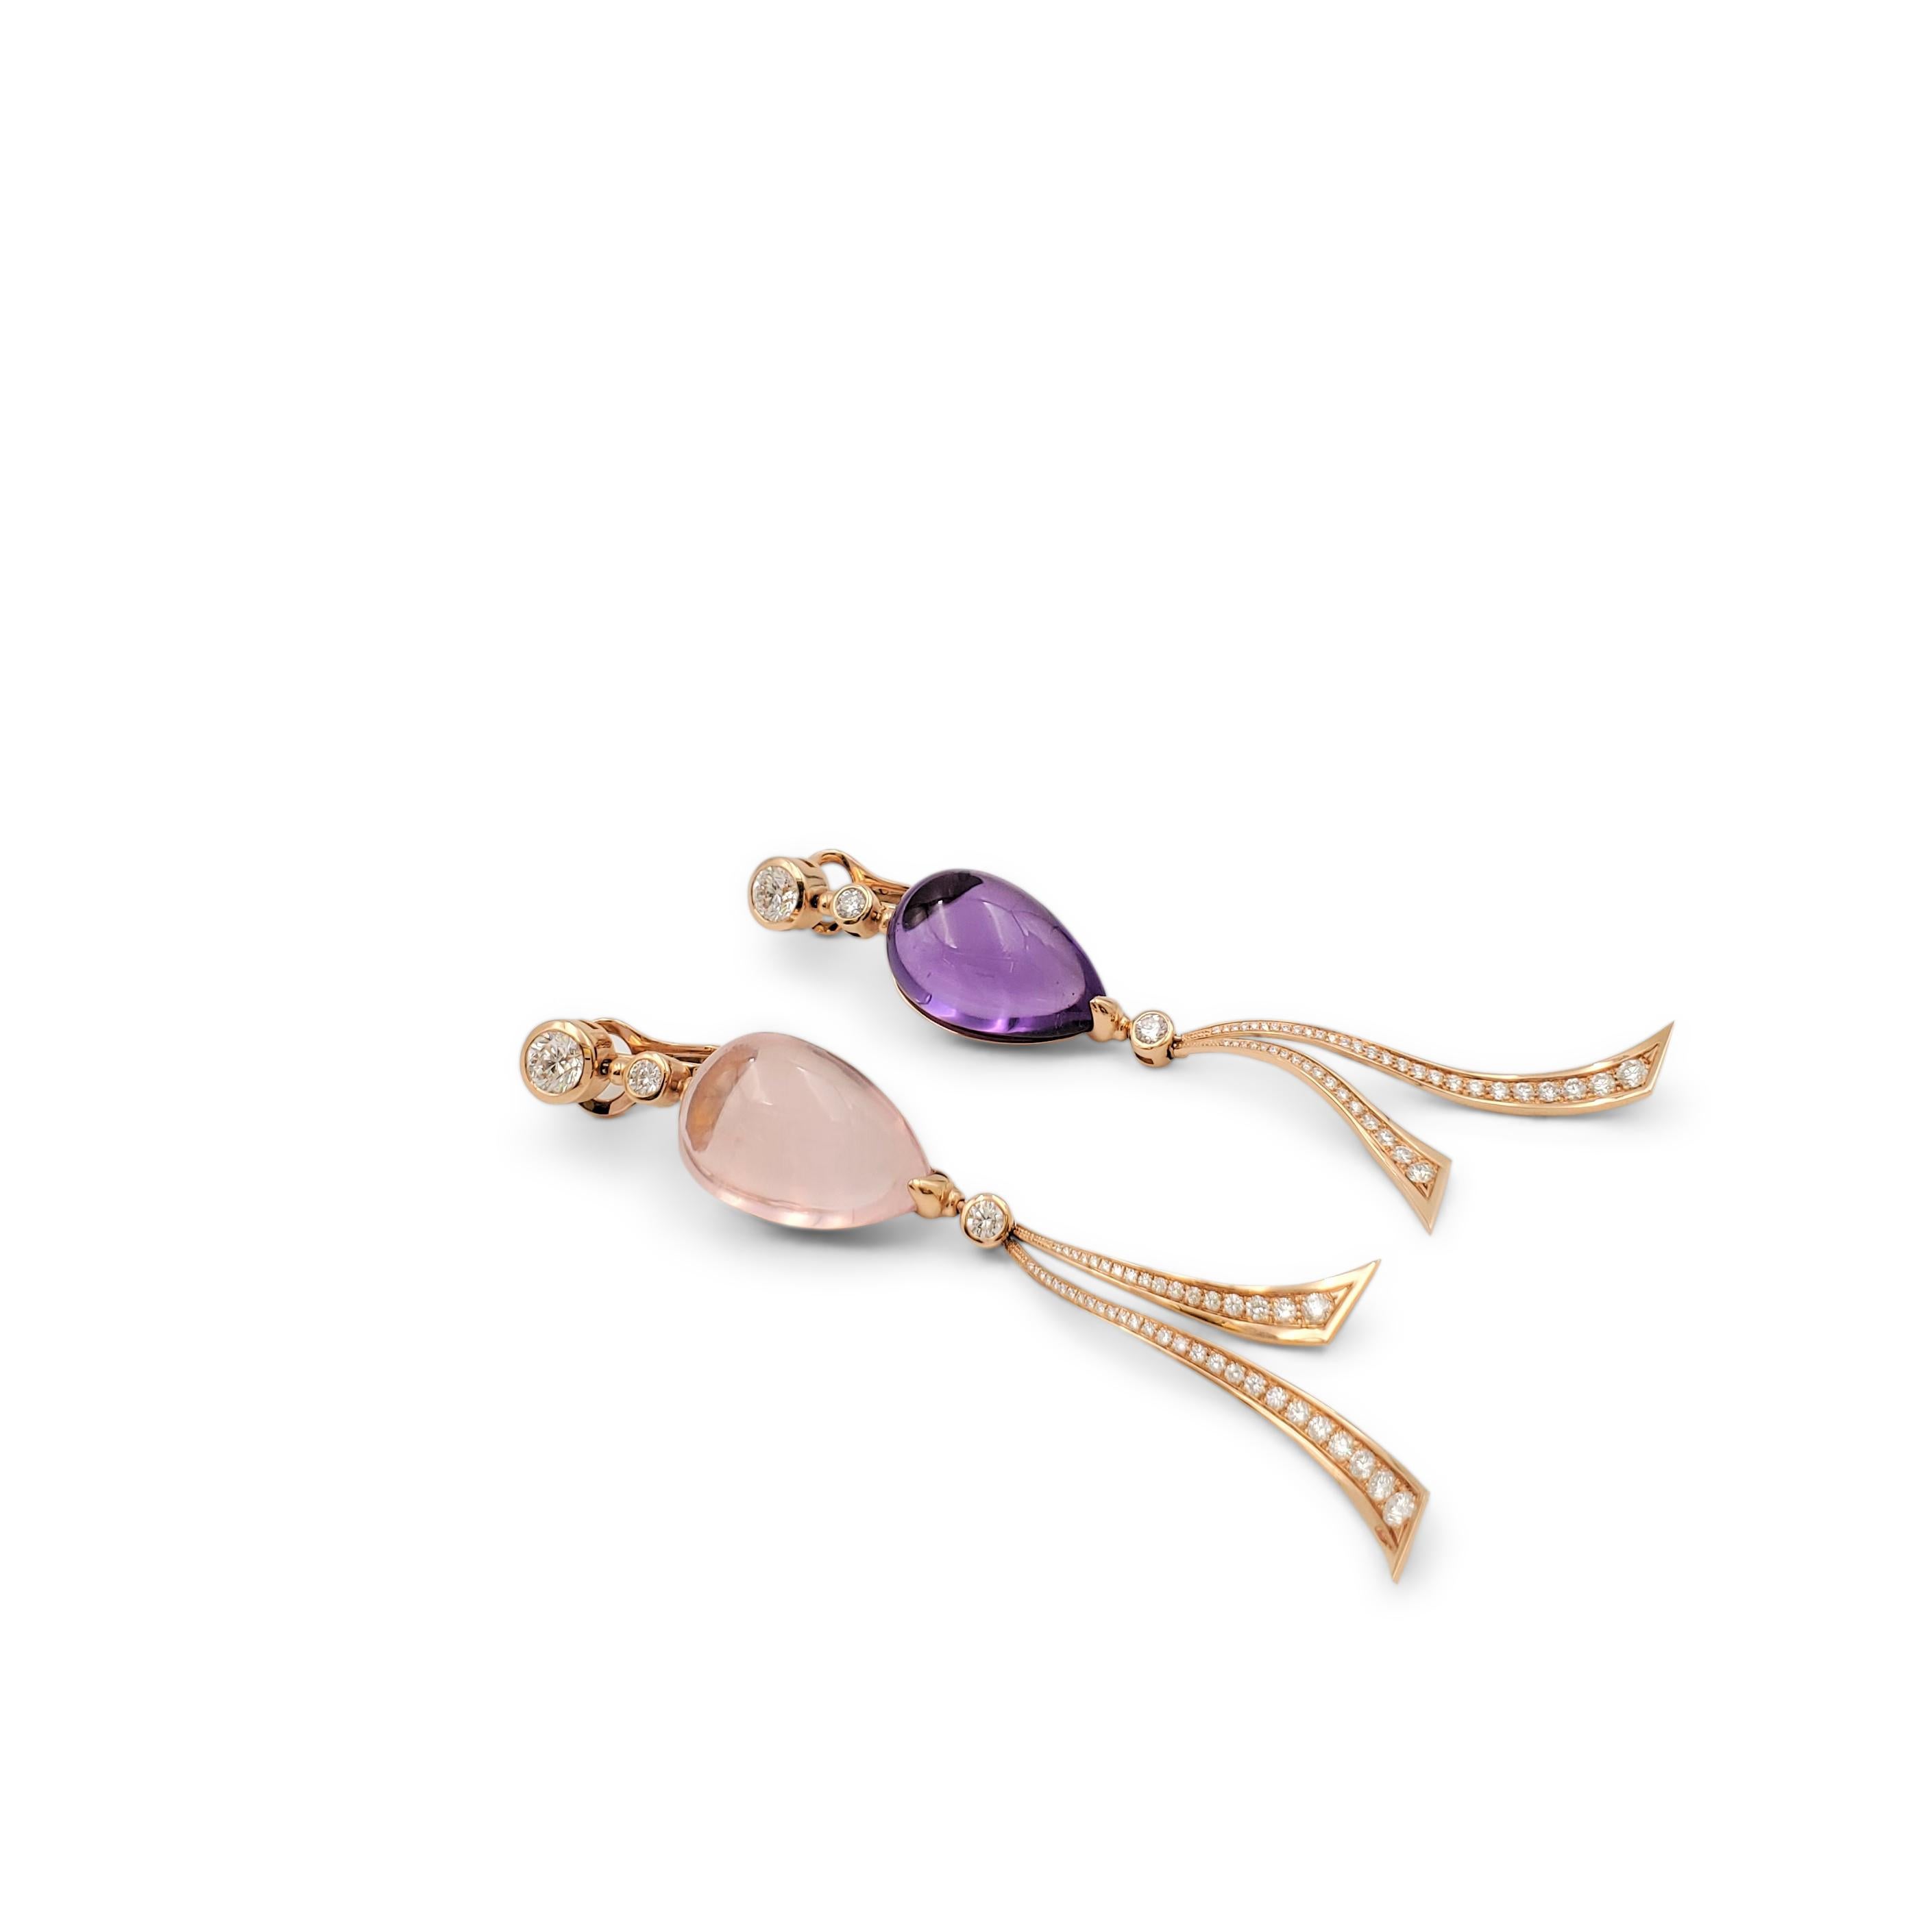 Authentic Bvlgari 'Festa' dangle earrings crafted in 18 karat rose gold. Each earring is set with either a rose quartz or an amethyst pear cabochon for a playful contrasting look. The earrings are highlighted by bezel-set round brilliant cut